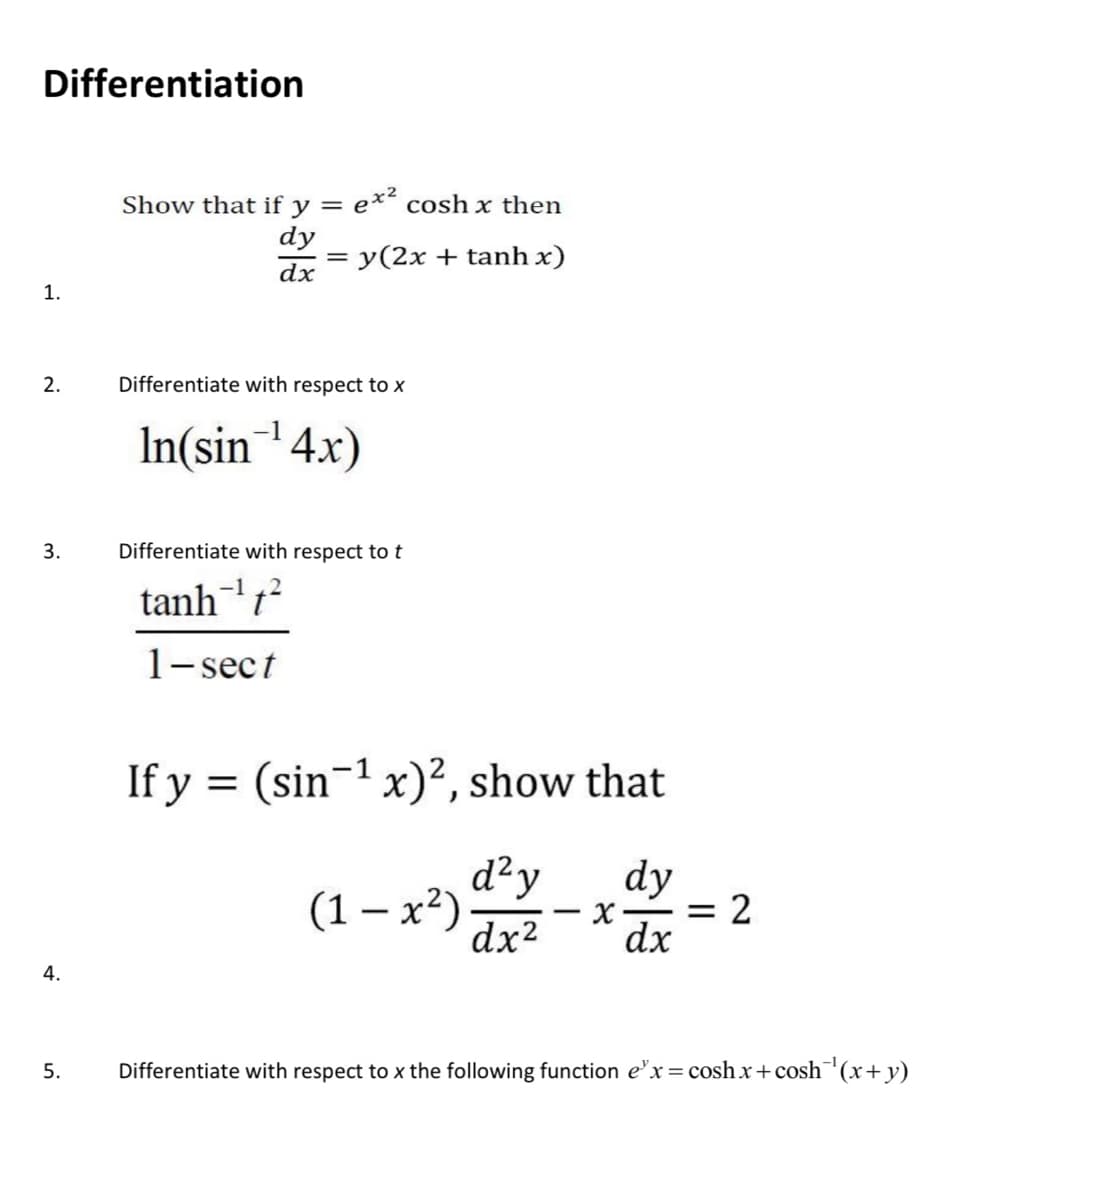 Differentiation
Show that if y = e*² cosh x then
dy
y(2x + tanh x)
dx
1.
2.
Differentiate with respect to X
In(sin4x)
3.
Differentiate with respect to t
tanht?
1- sect
If y = (sin¬1 x)², show that
d²y
(1 – x²)
dx2
dy
= 2
dx
--%
4.
5.
Differentiate with respect to x the following function e'x = cosh x+cosh¯(x+y)
